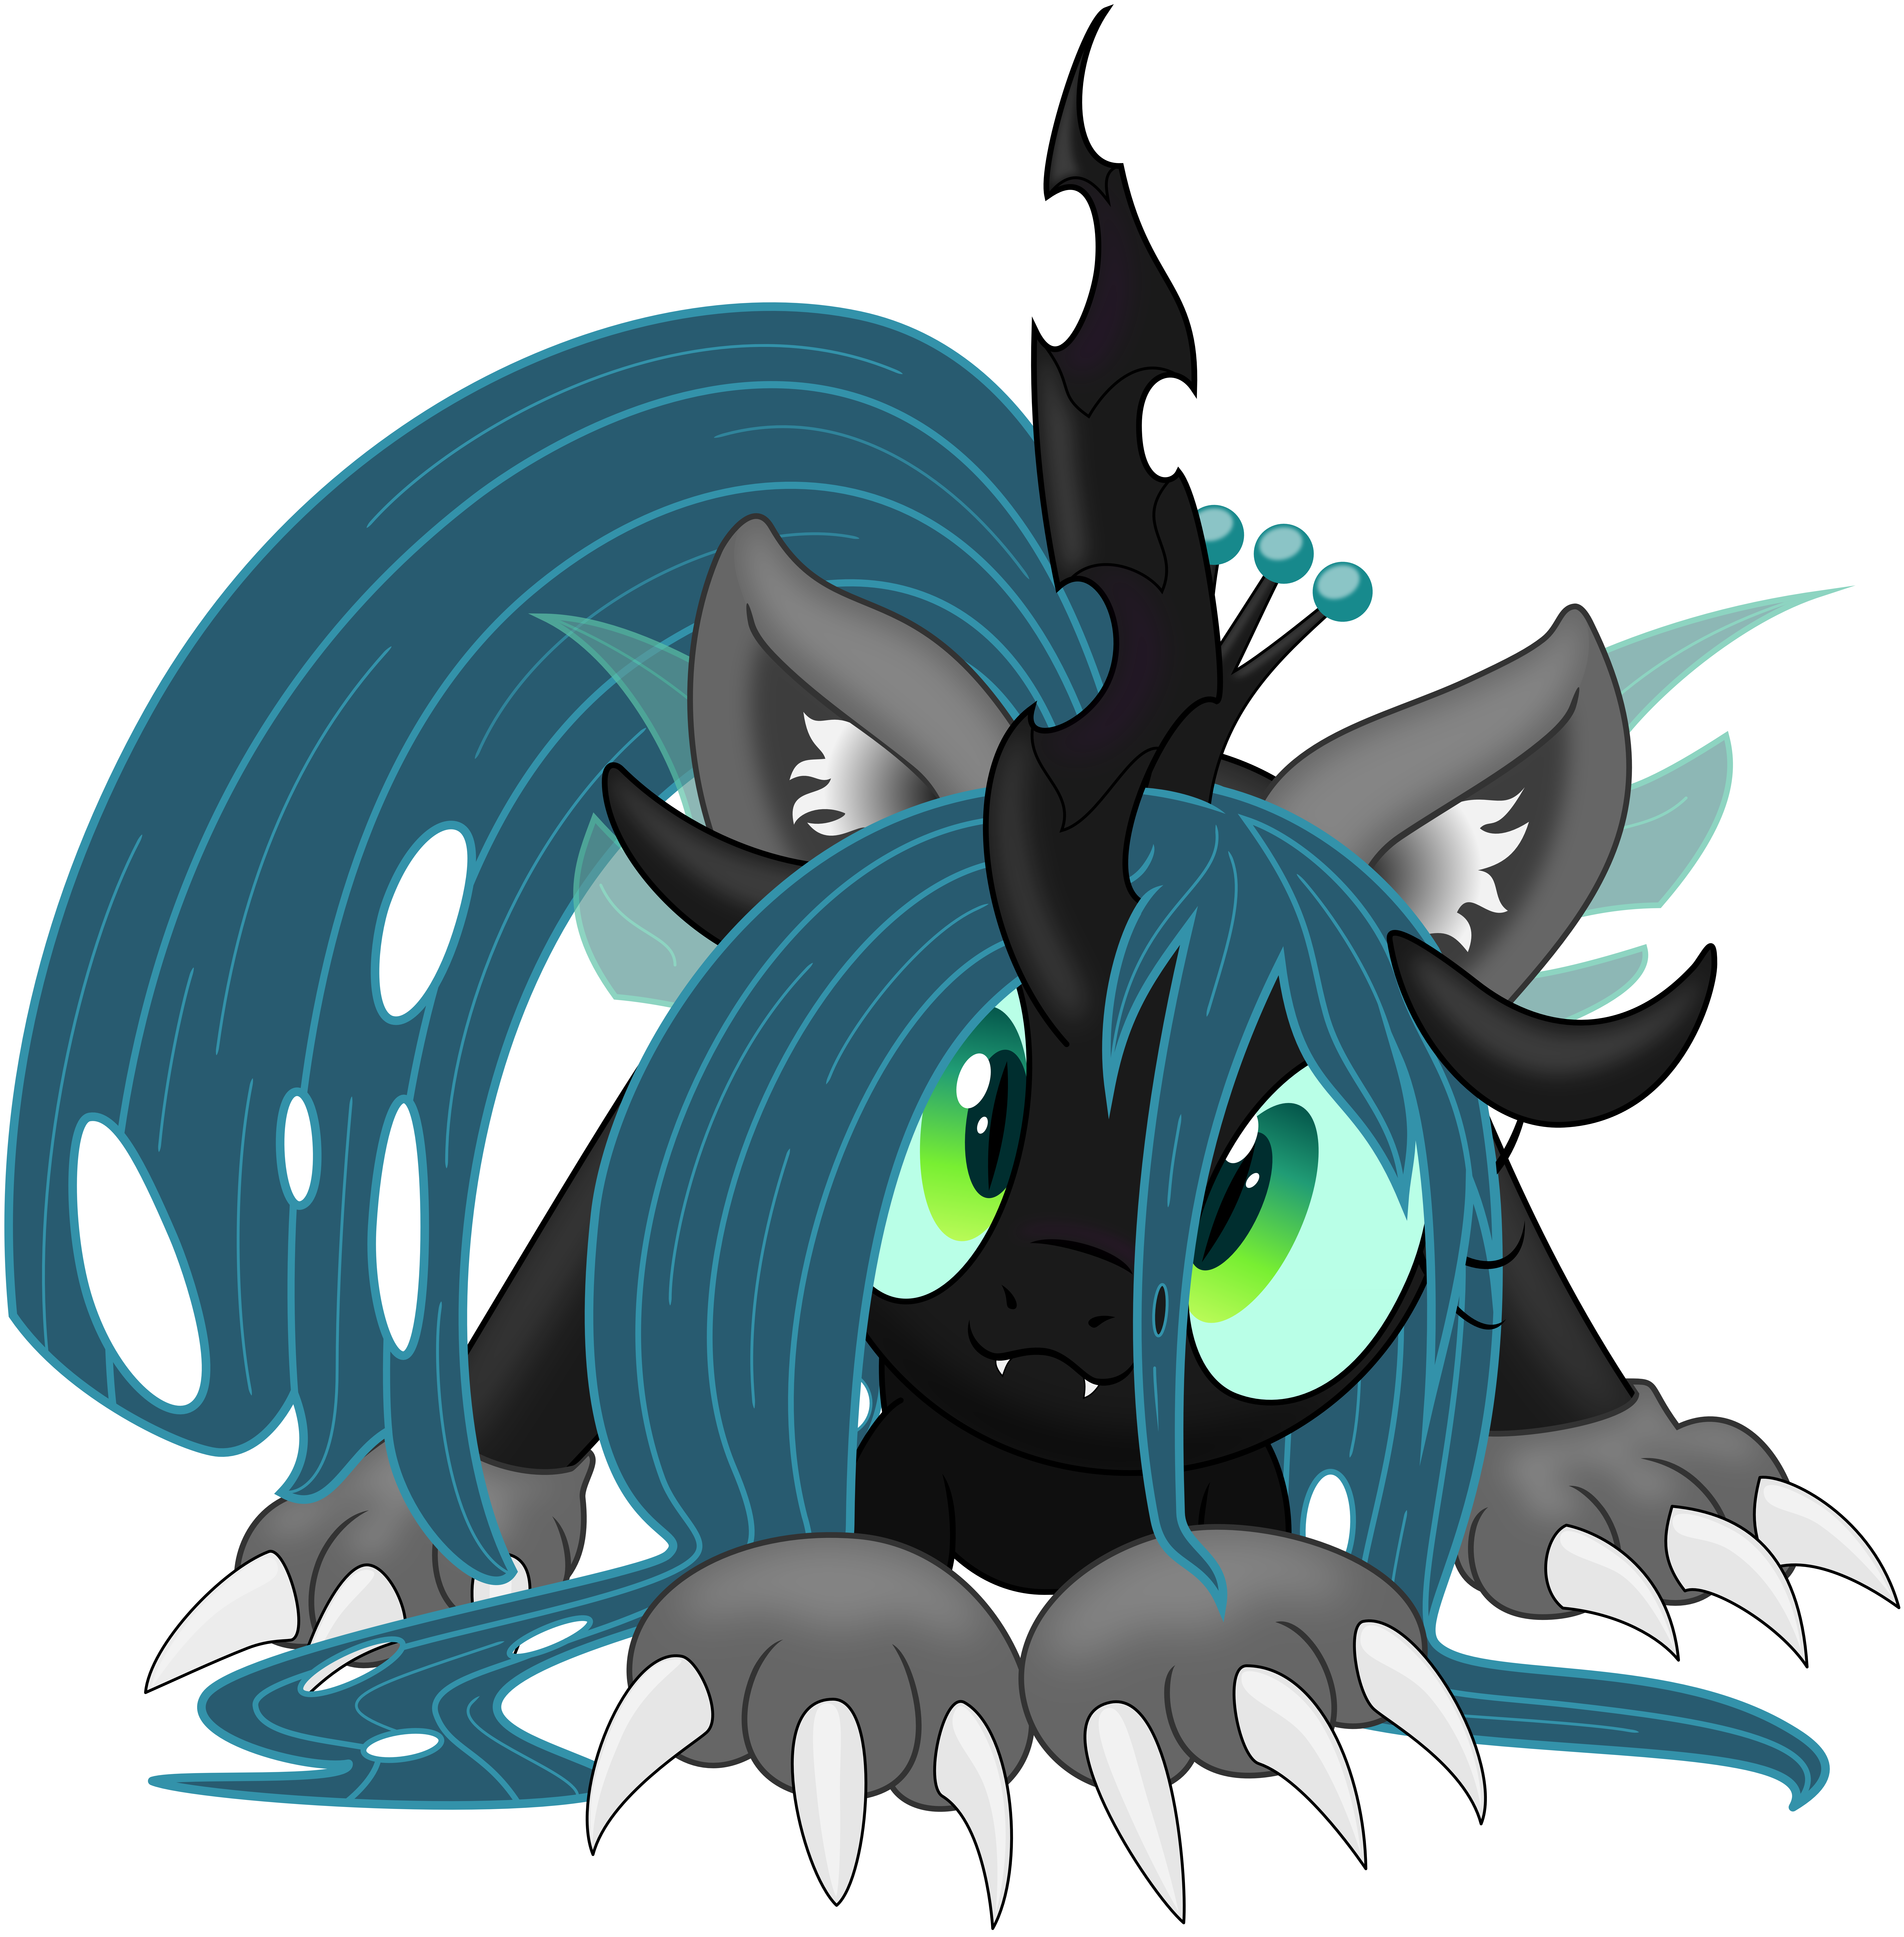 kitty_chrysalis_by_sallemcat-d6zmogt.png